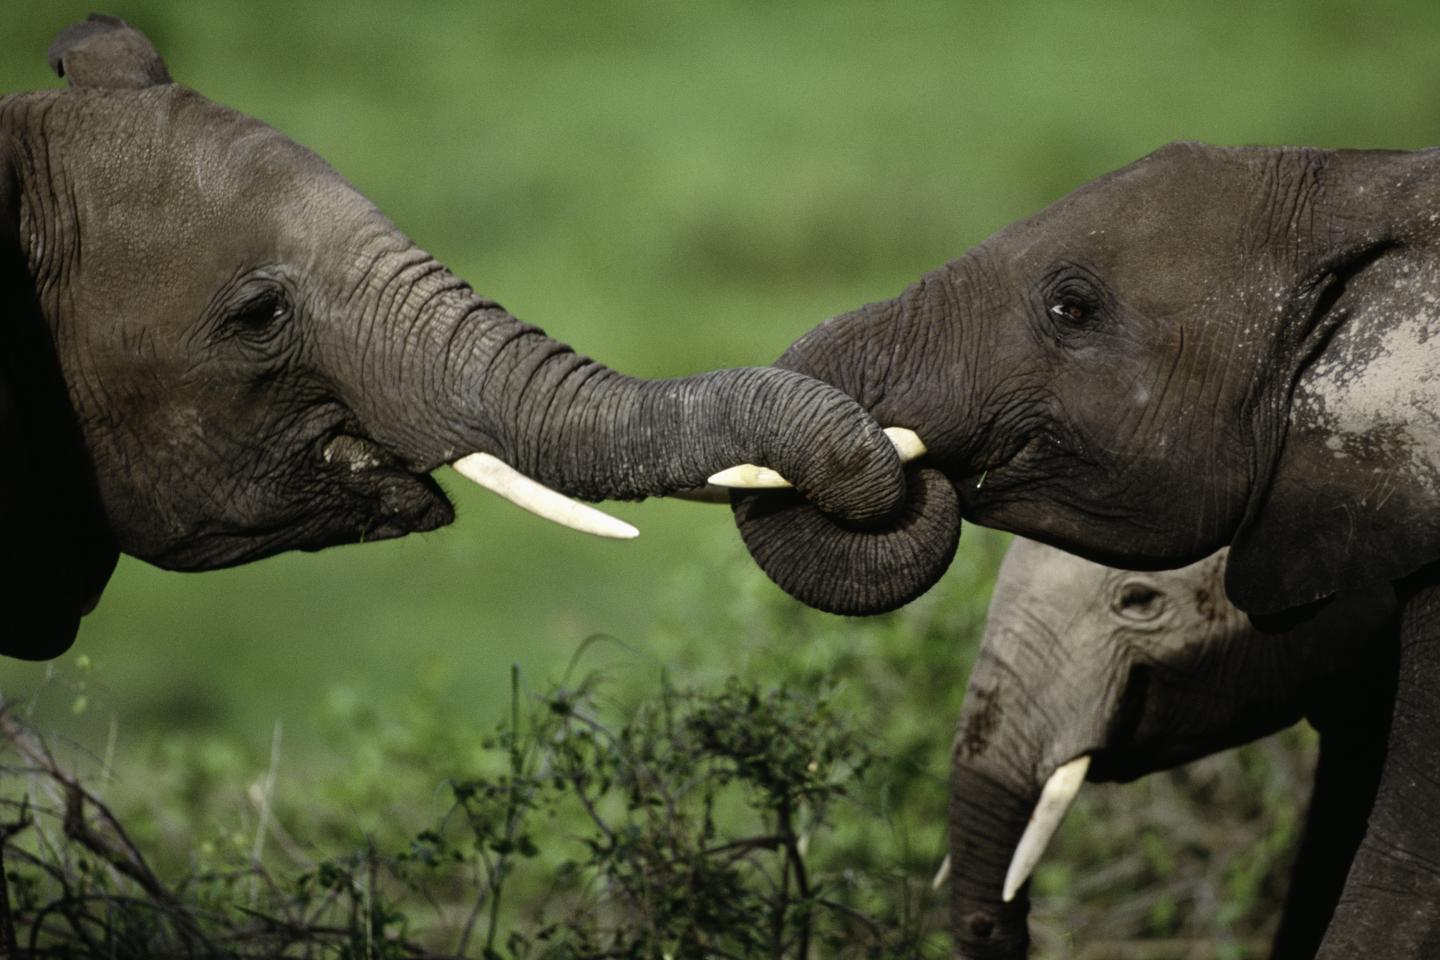 Three Major Cartels Exposed for Large Shipments of Illegal Ivory